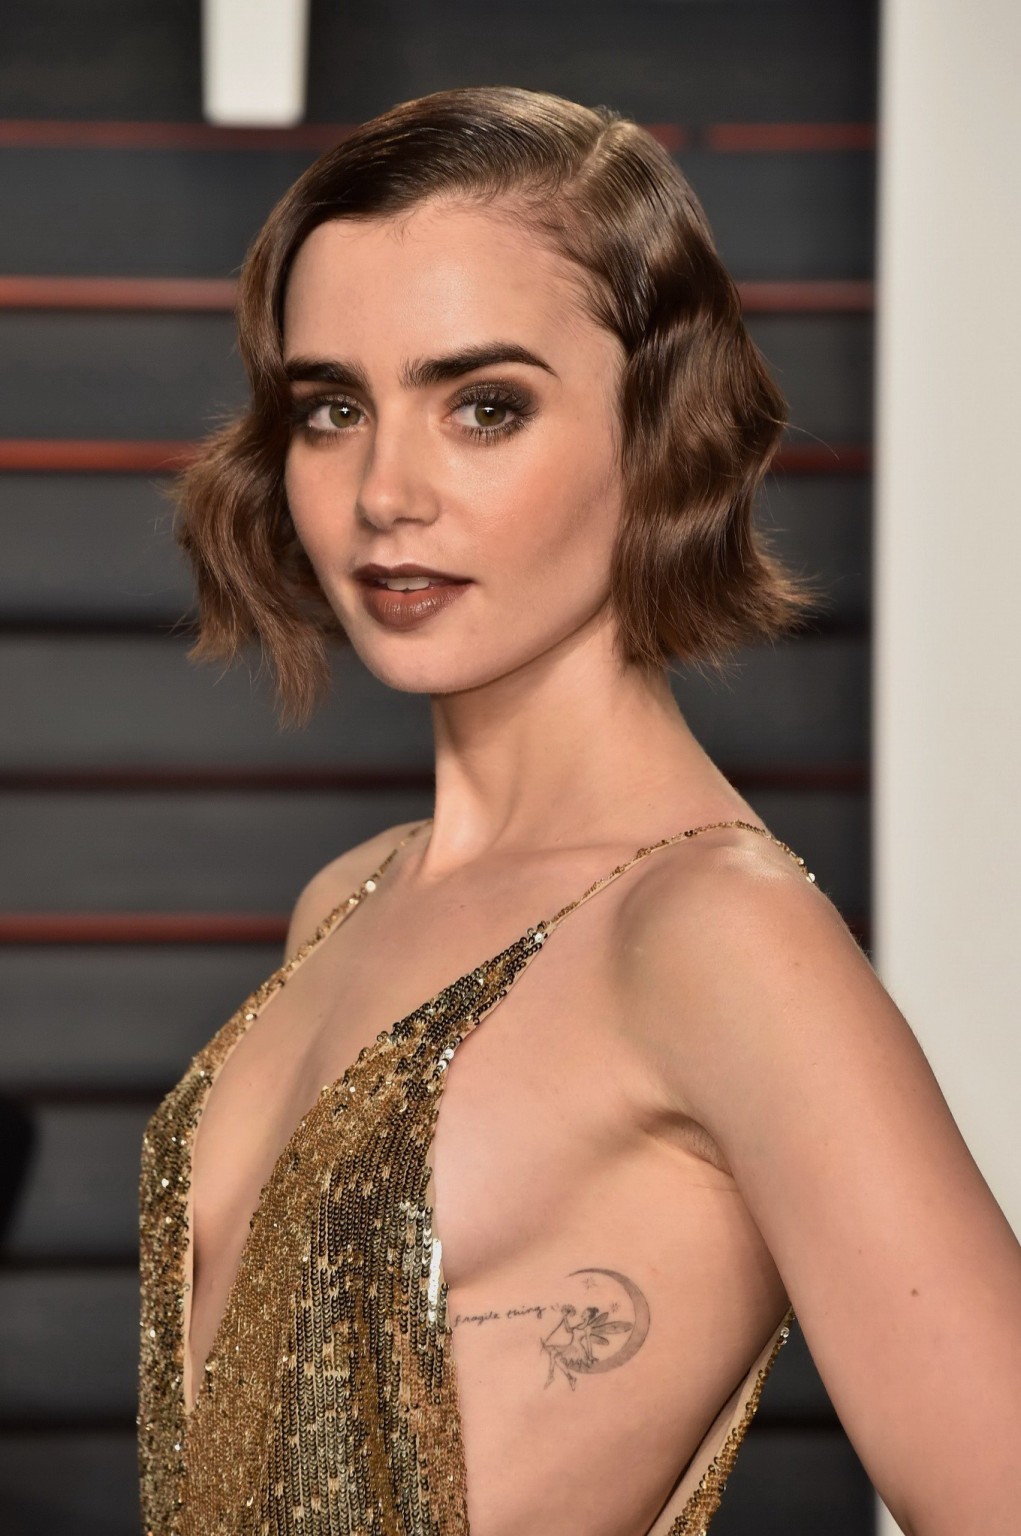 Lily Collins showing sideboob huge cleavage and legs #75145287